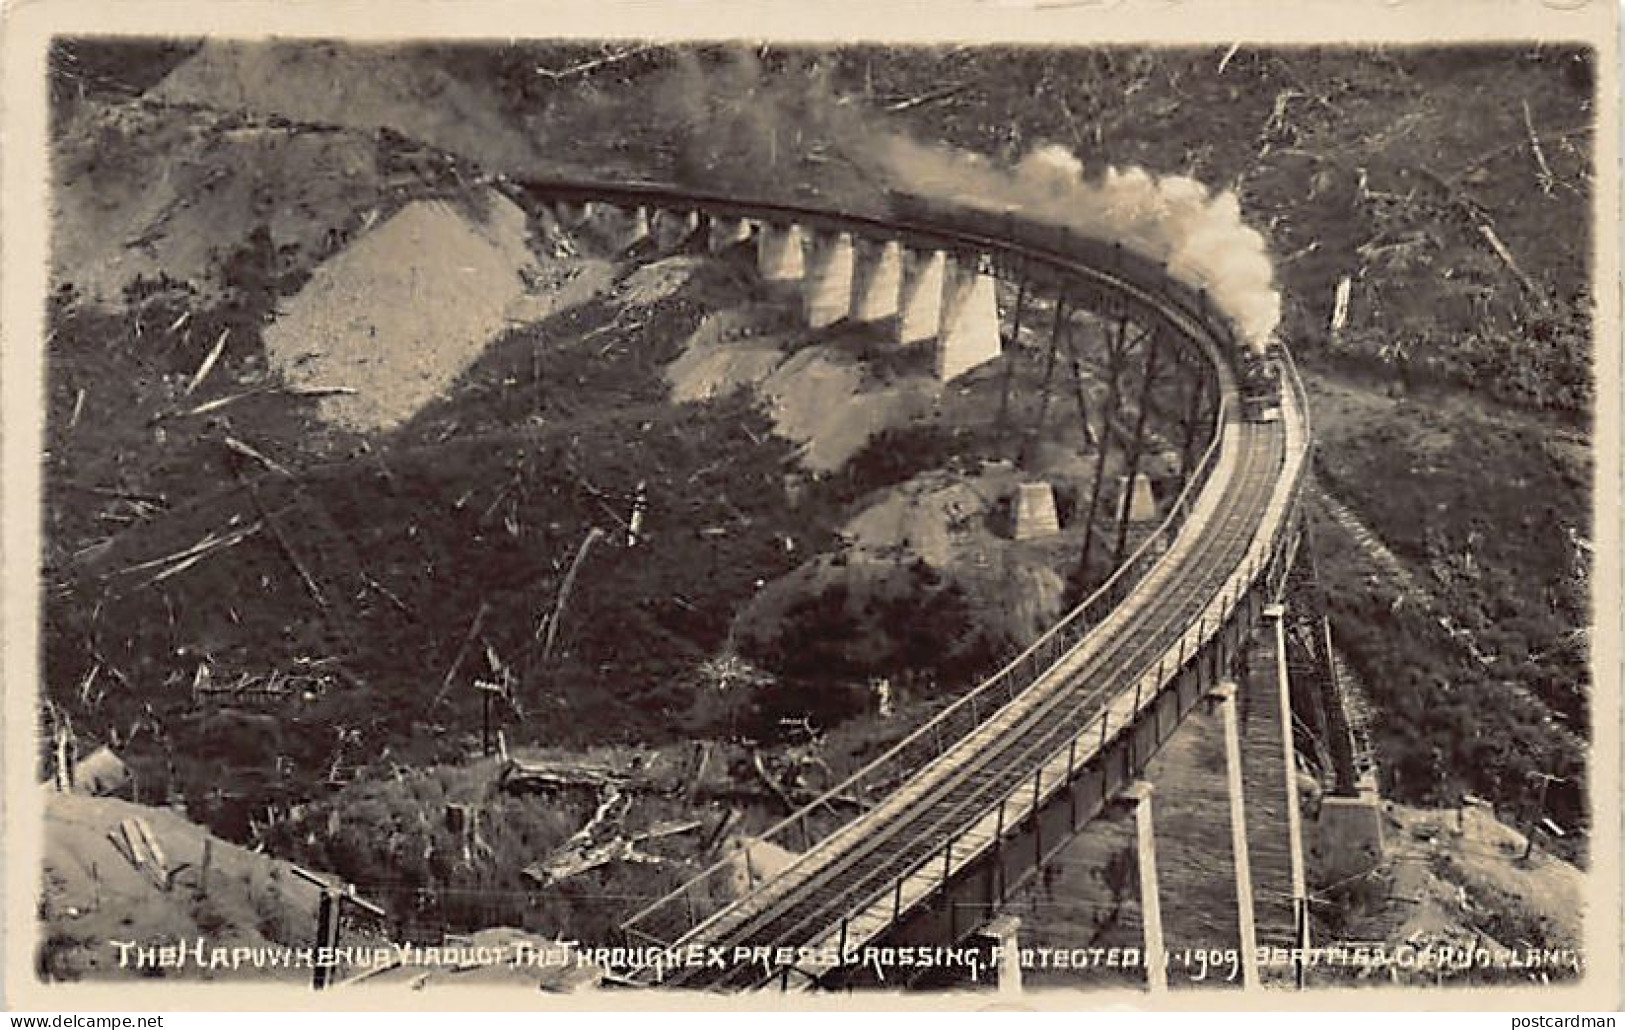 New Zealand - The Hapuwhenwa Railway Viaduct - The Through Express Crossing - REAL PHOTO - Publ. W. Beattie & Co. 1909  - New Zealand